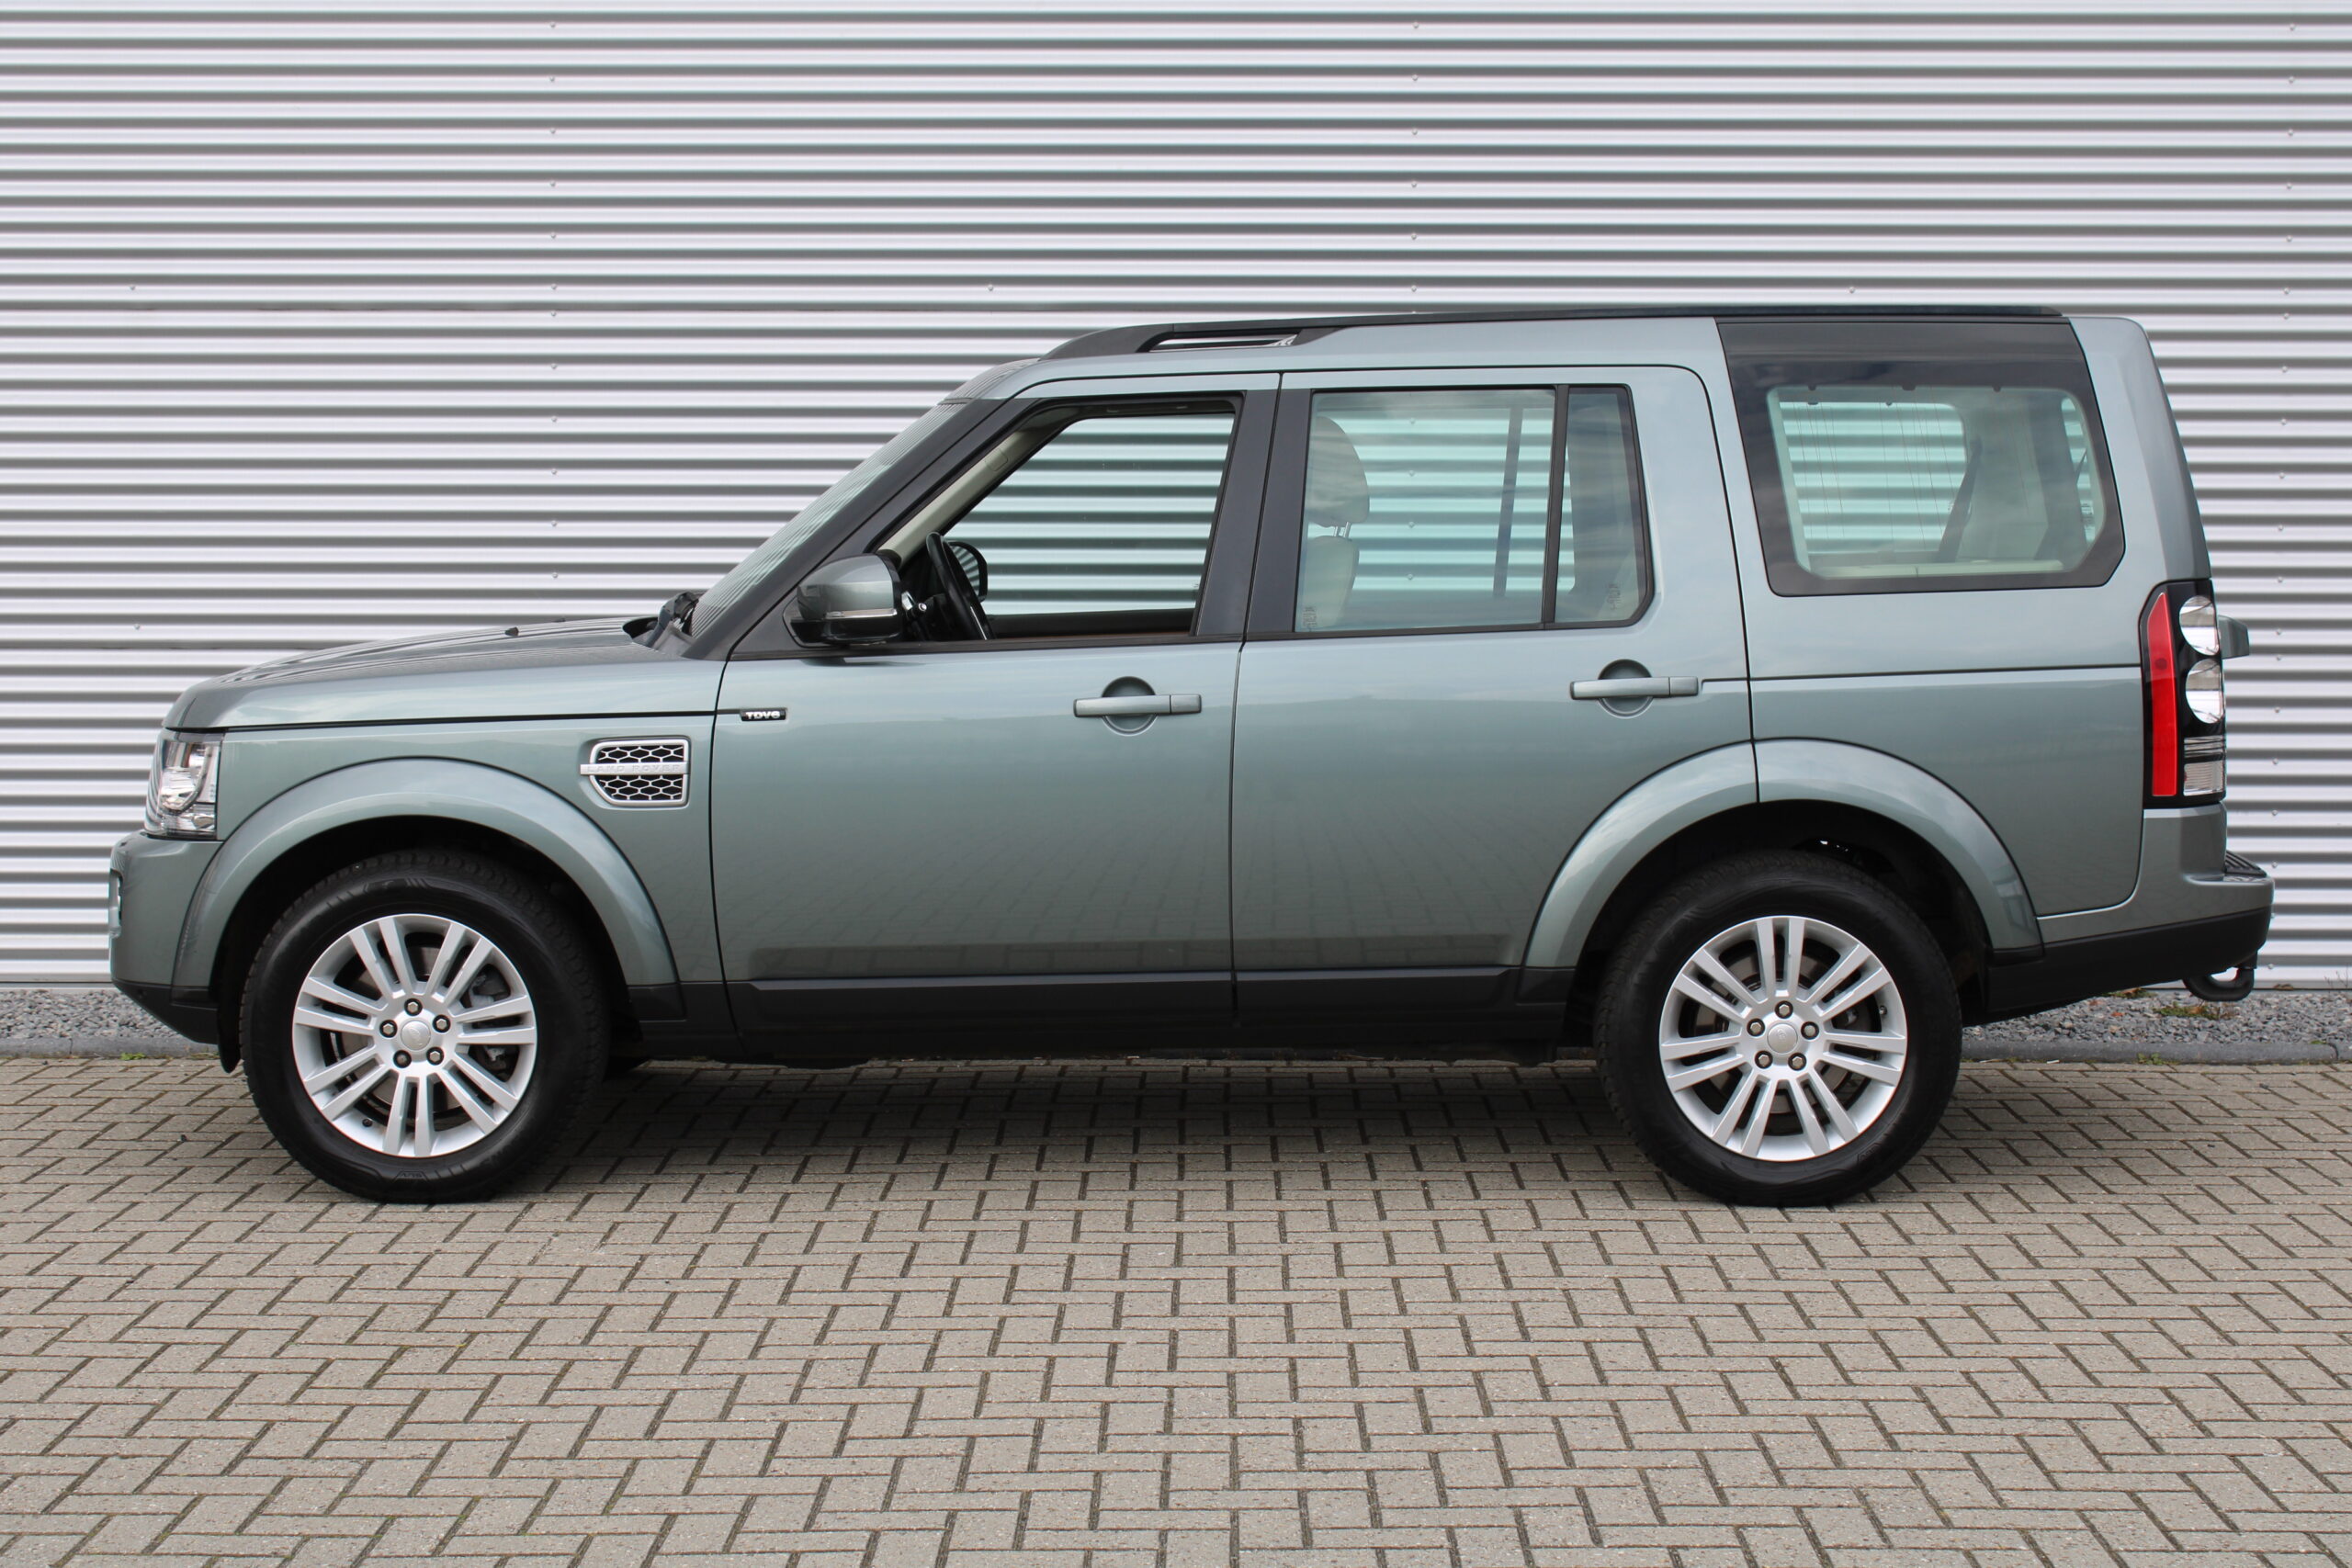 Land Rover Discovery 4 3.0 TDV6 HSE 7-Seater